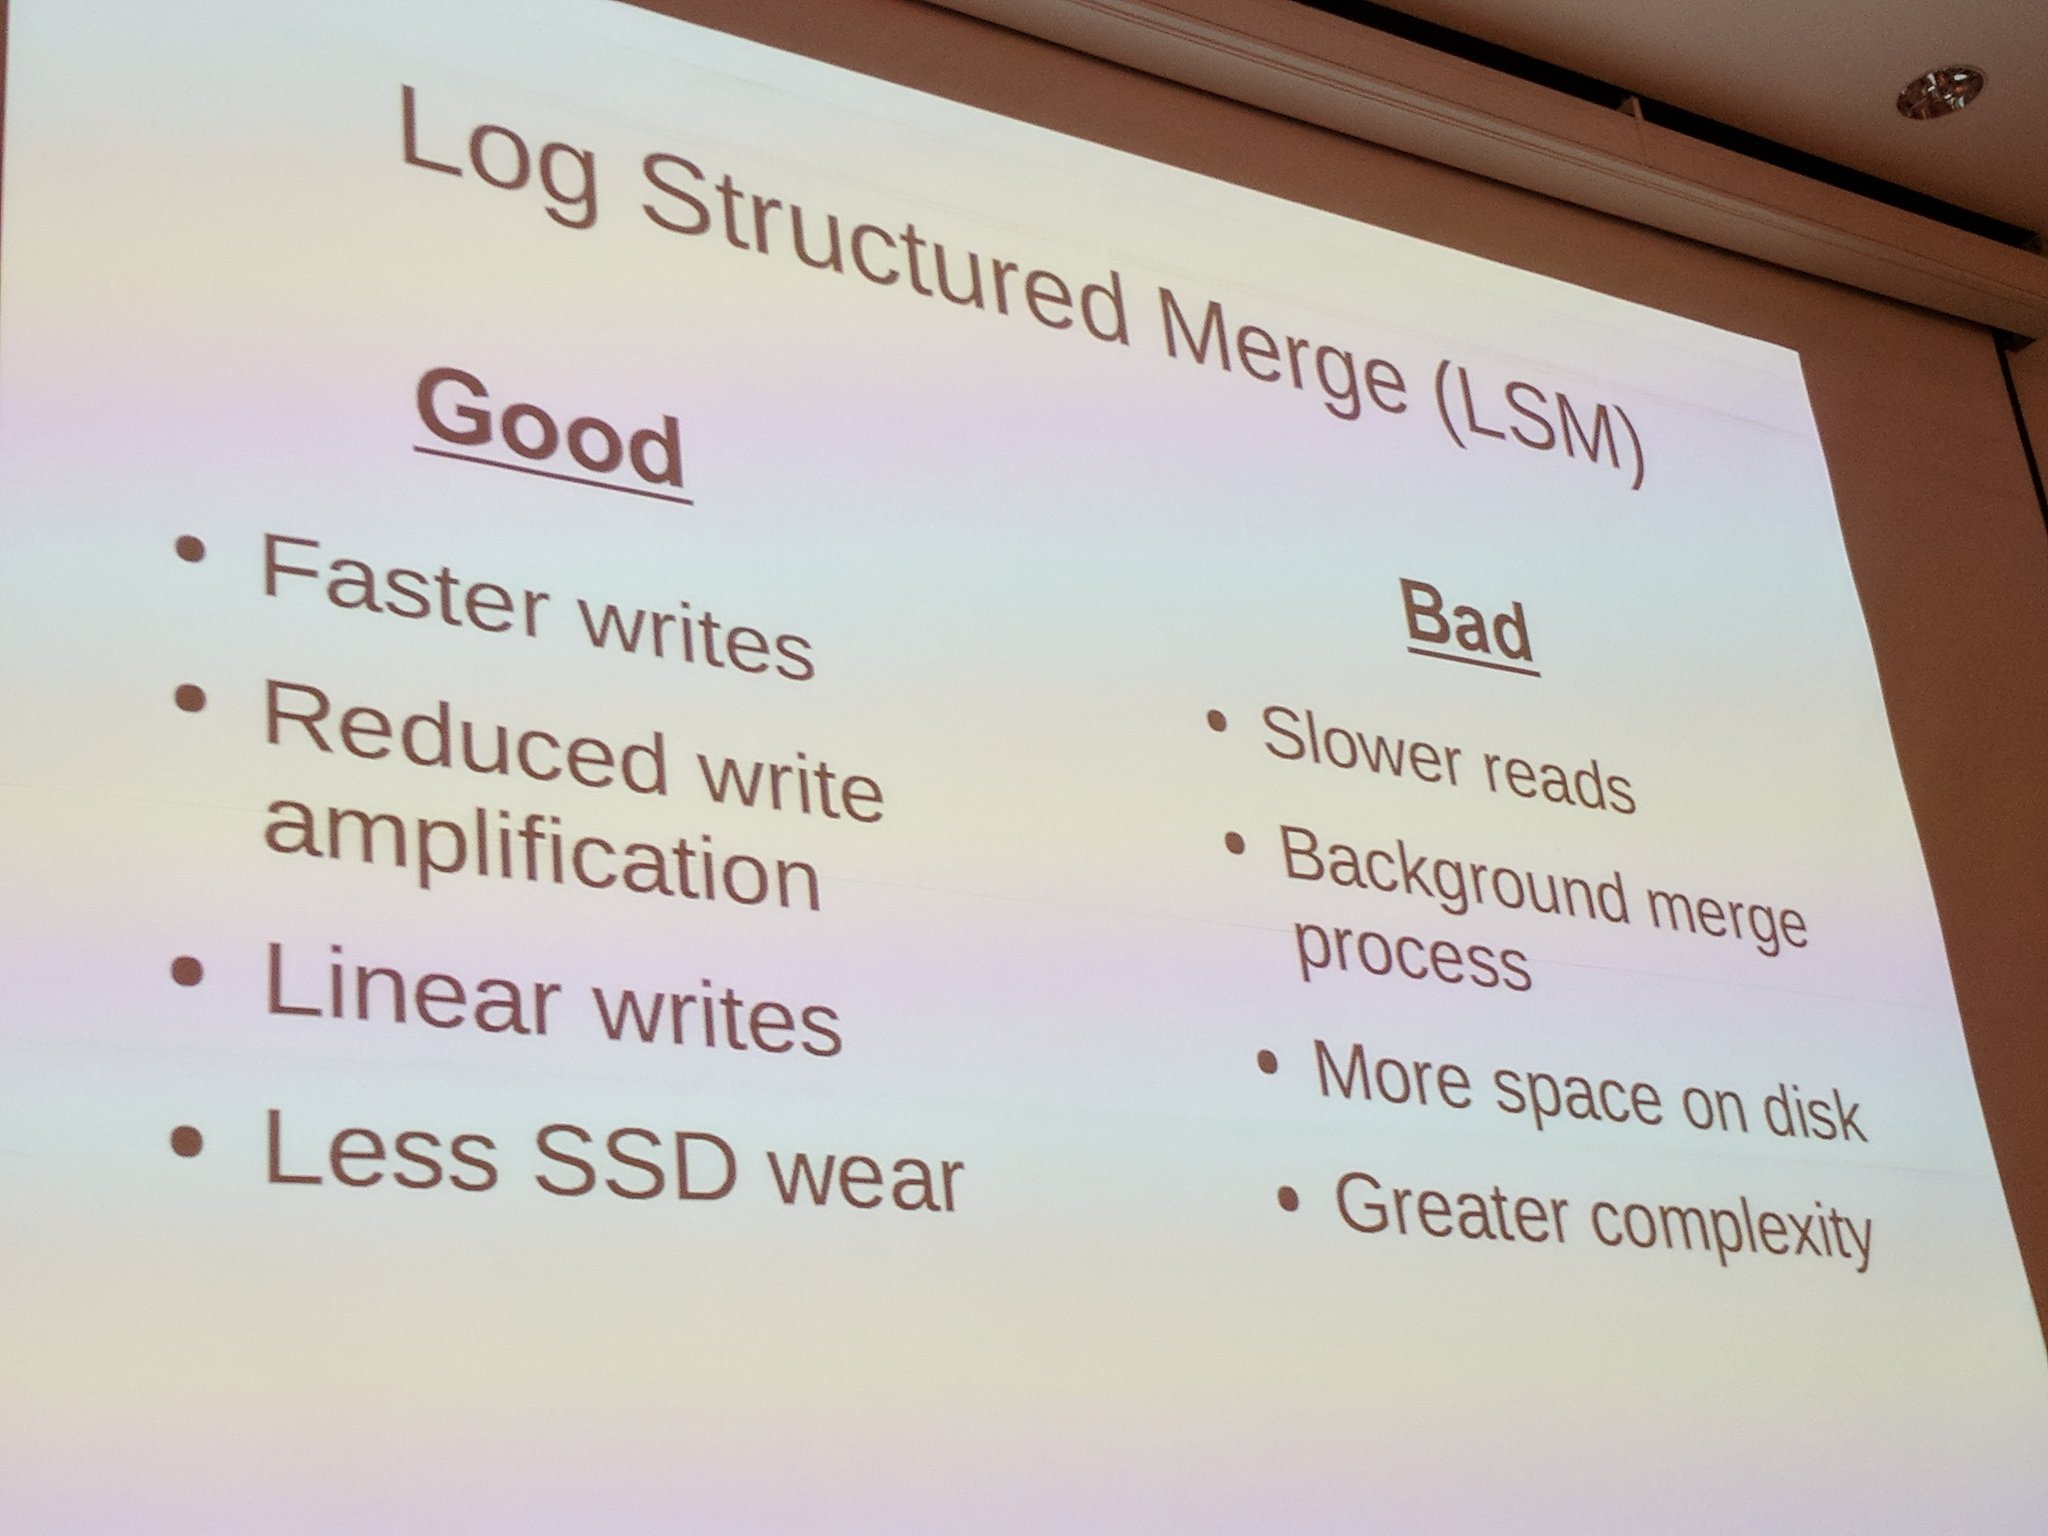 Pros and cons of LSM. Good: Faster writes, reduced write amplification, linear writes, less SSD wear. Bad: Slower reads, background merge process, more space on disk, greater complexity